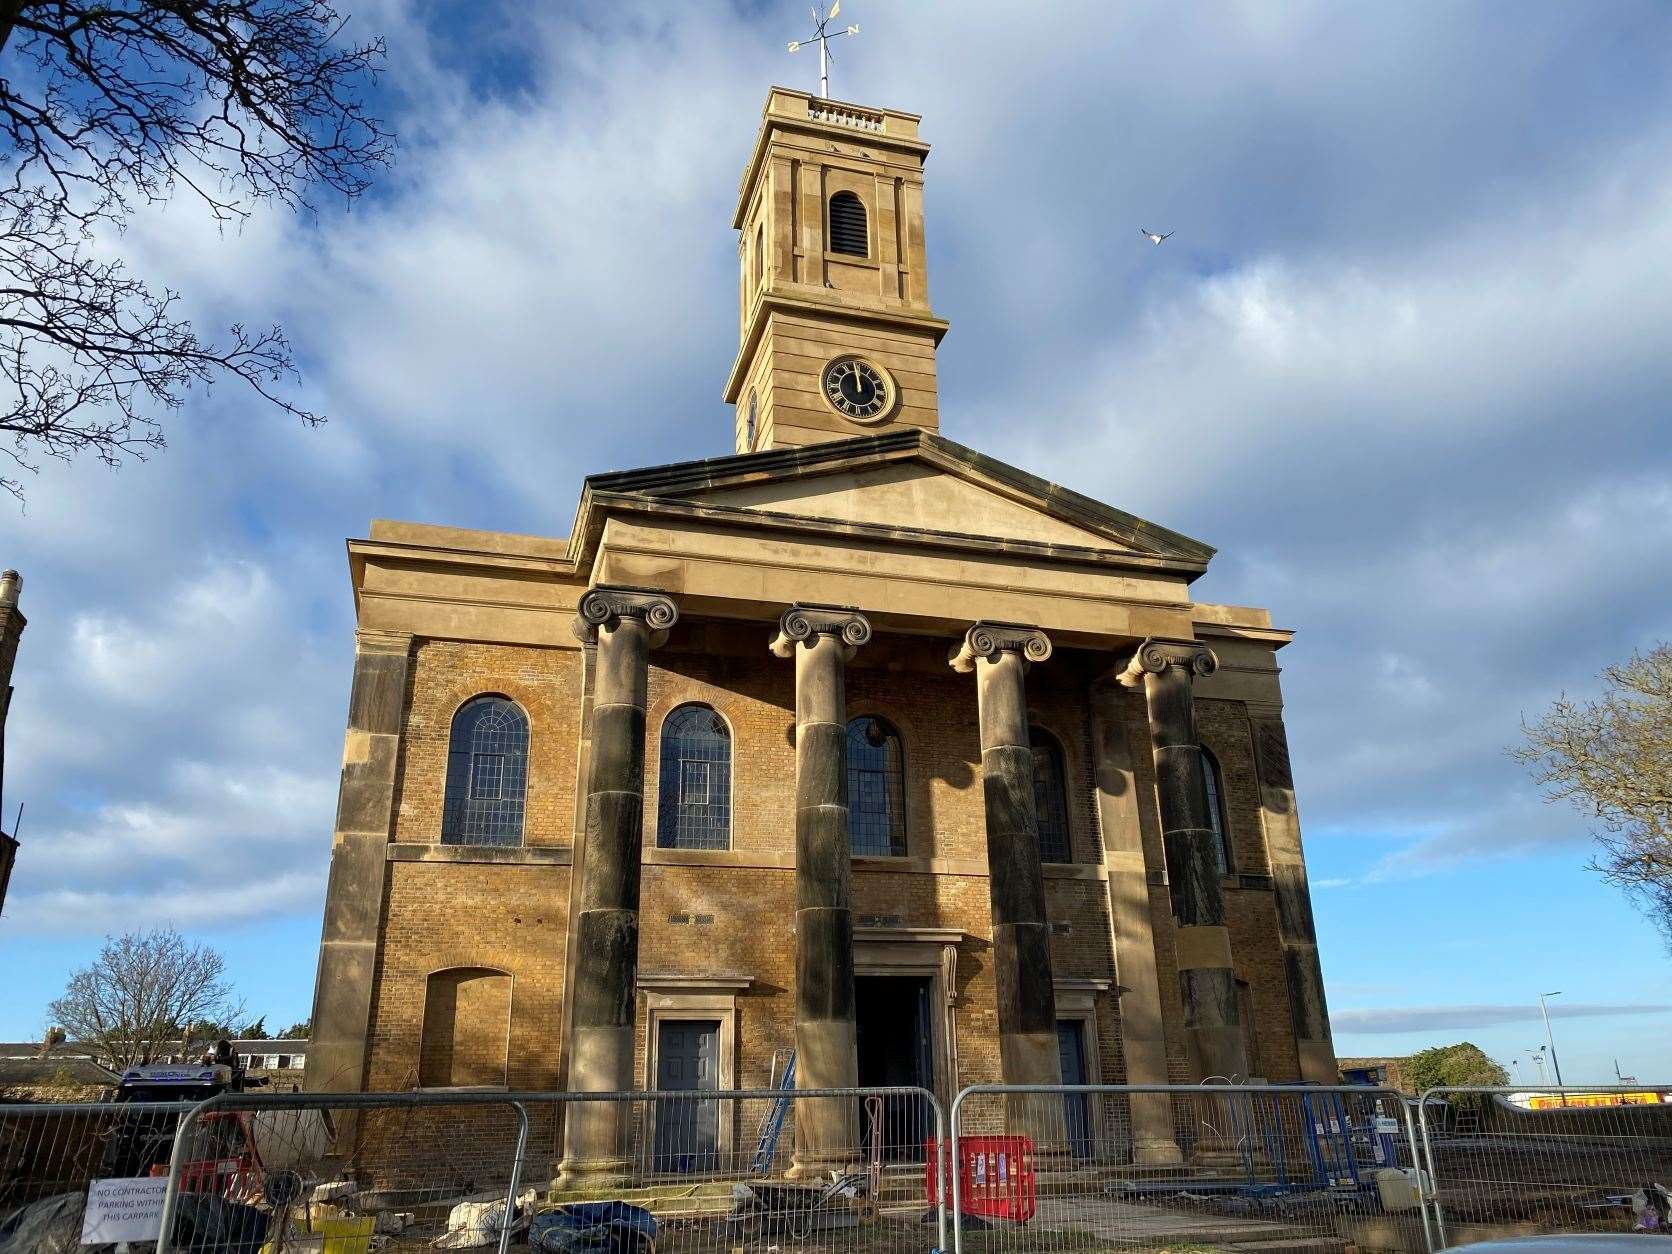 An £8.5million generation project started at Sheerness Dockyard Church in 2020